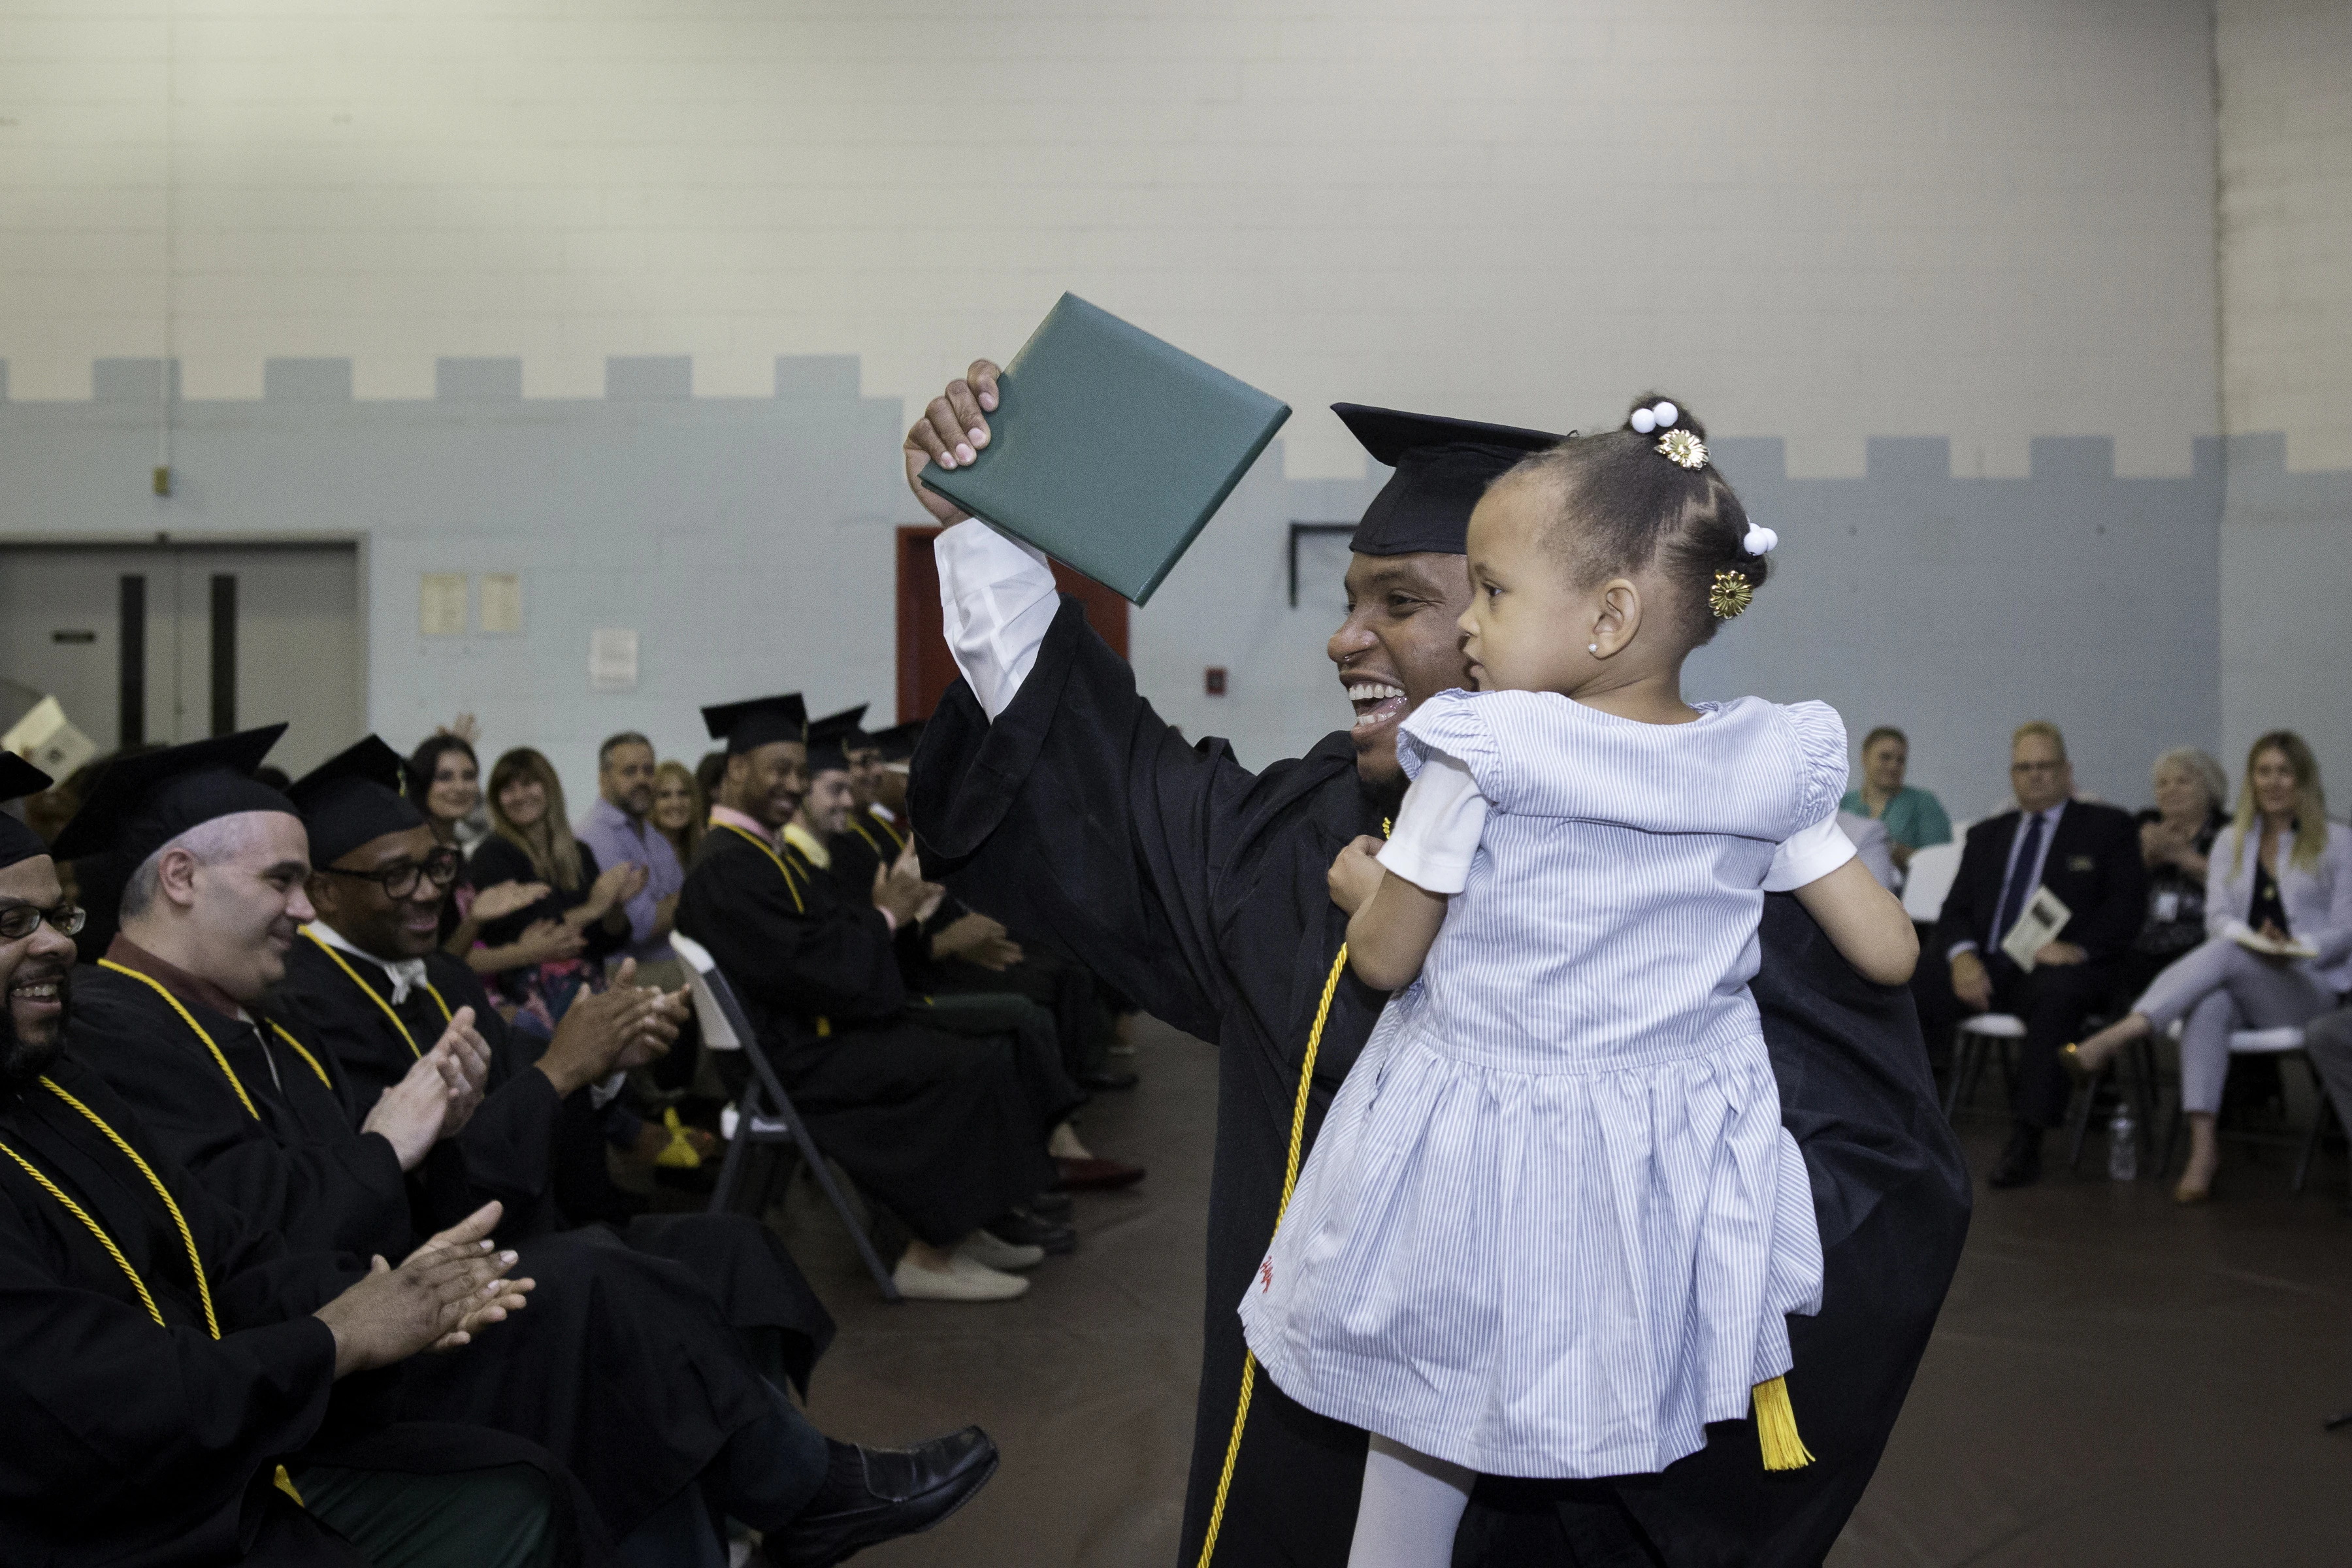 A smiling graduate wearing a cap and gown stands in a room before other graduates. The graduate is holding up a diploma and a child.